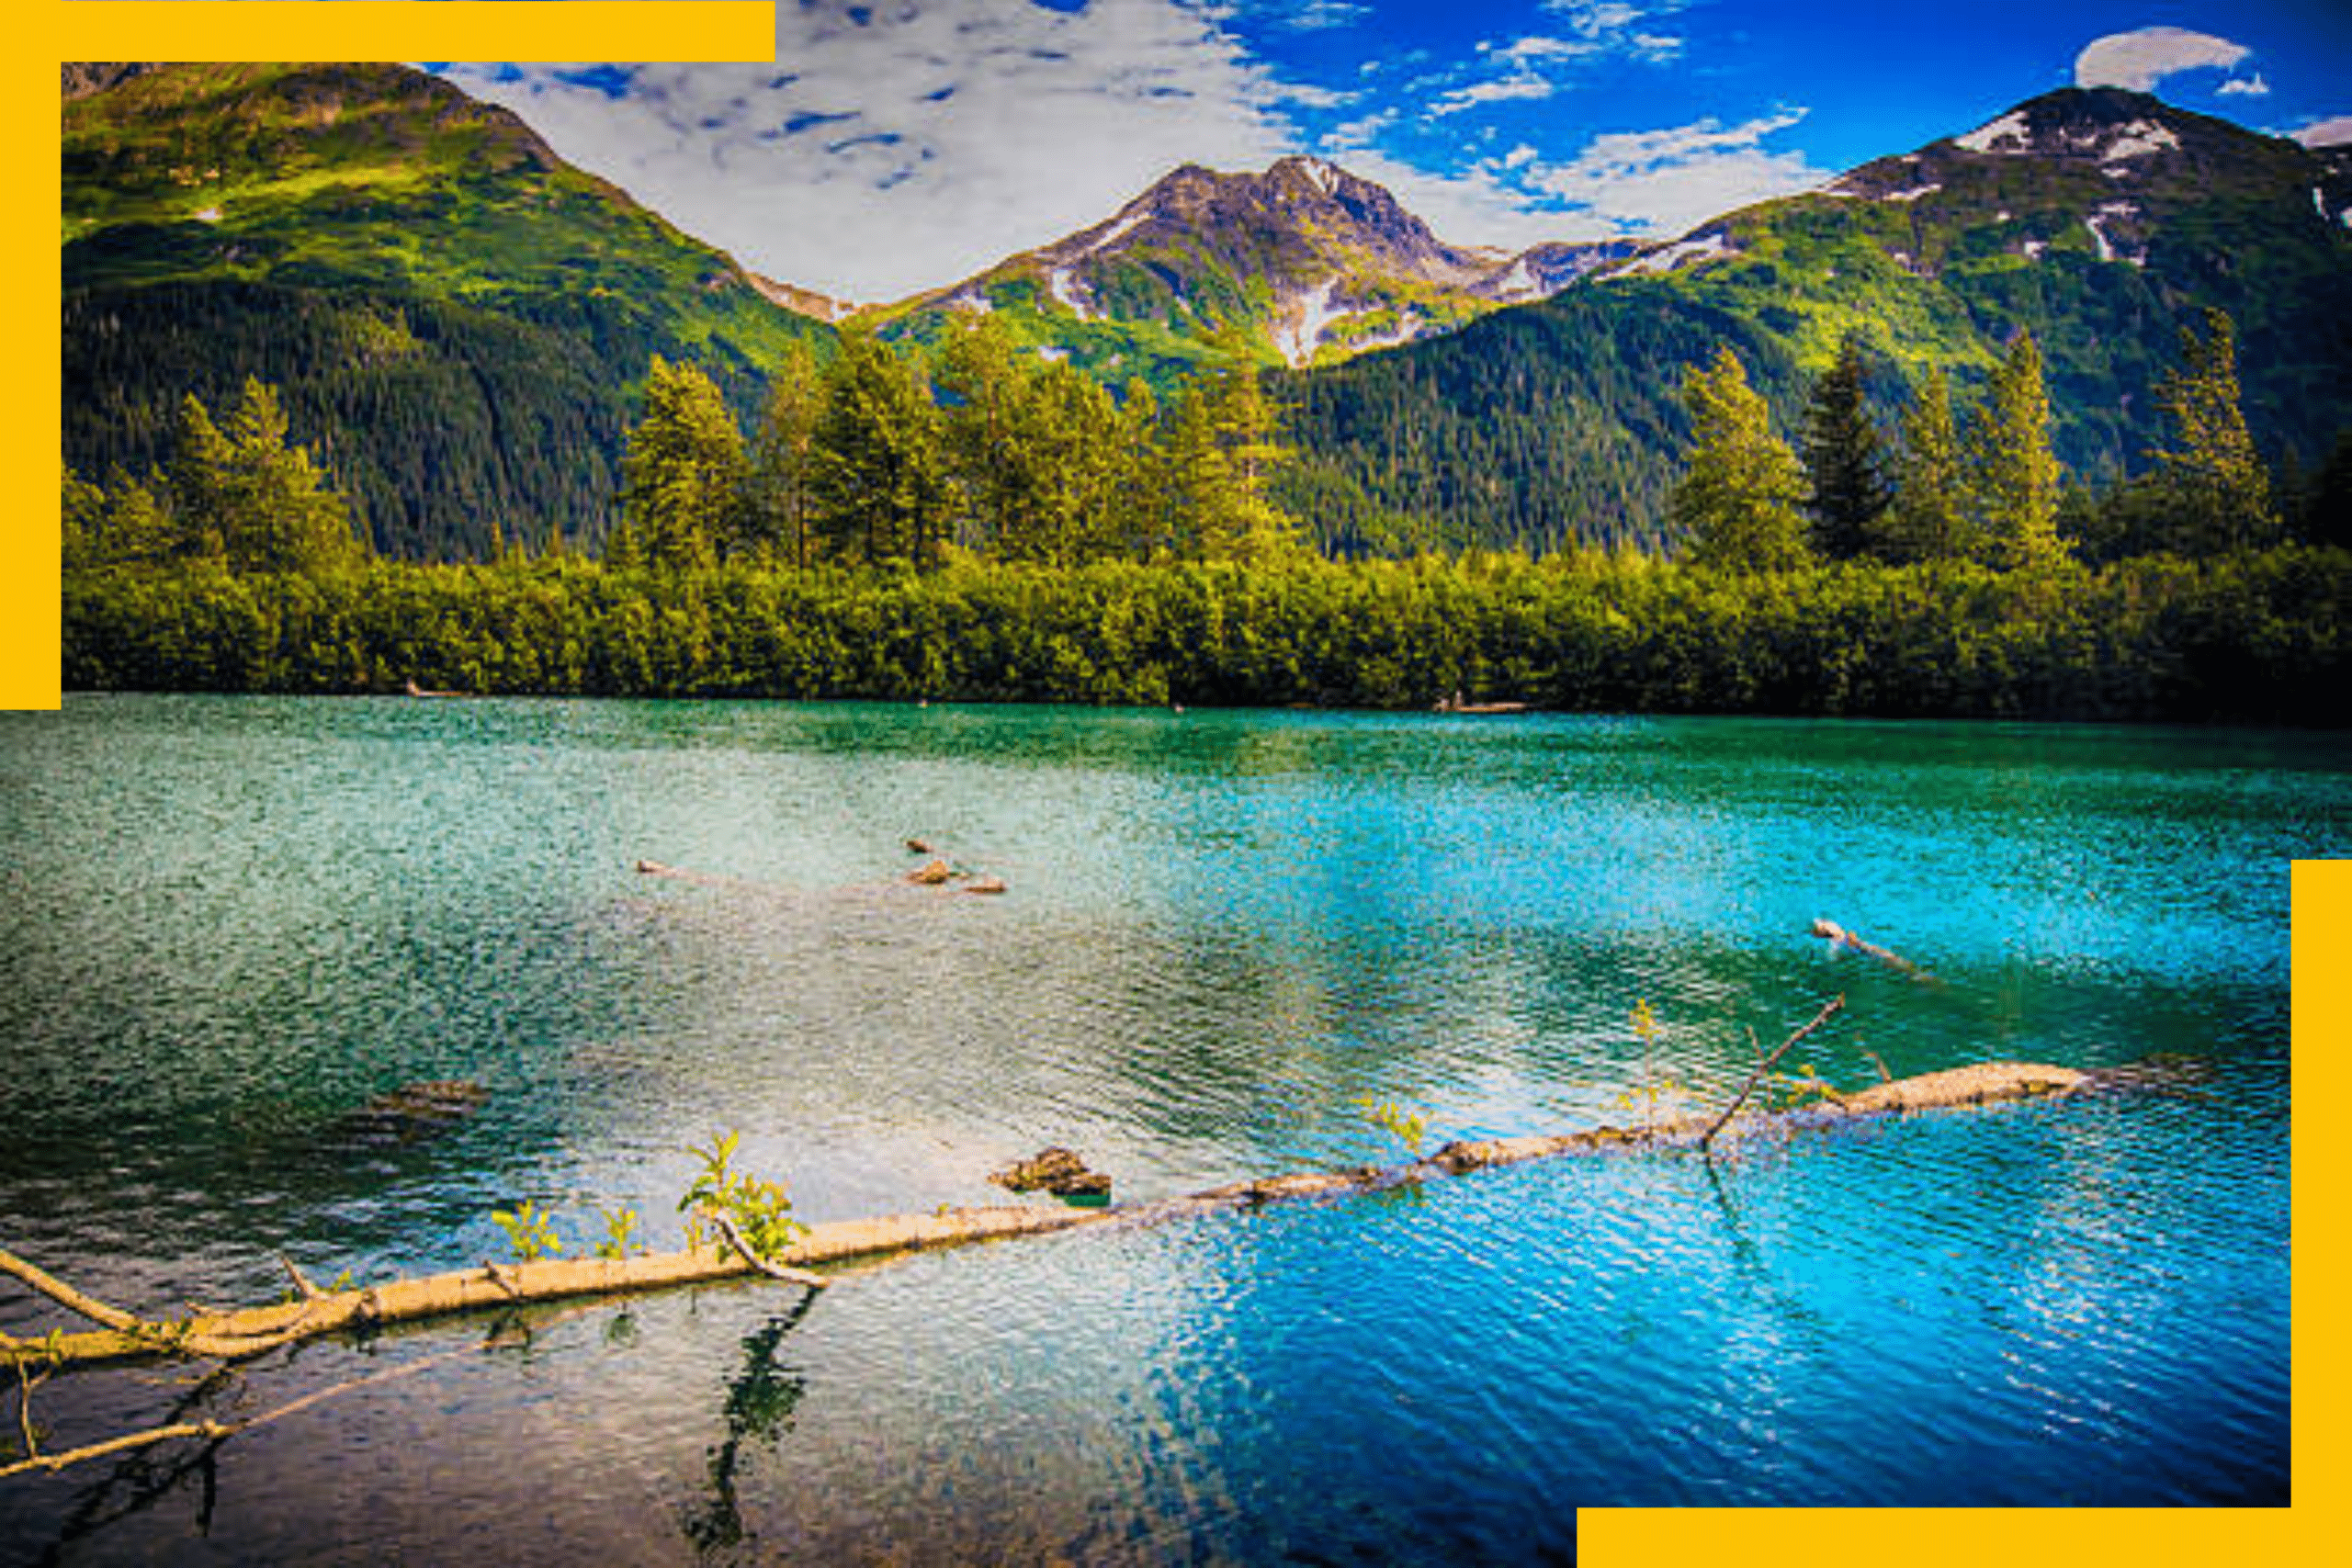 A serene Alaskan lake surrounded by greenery and mountains